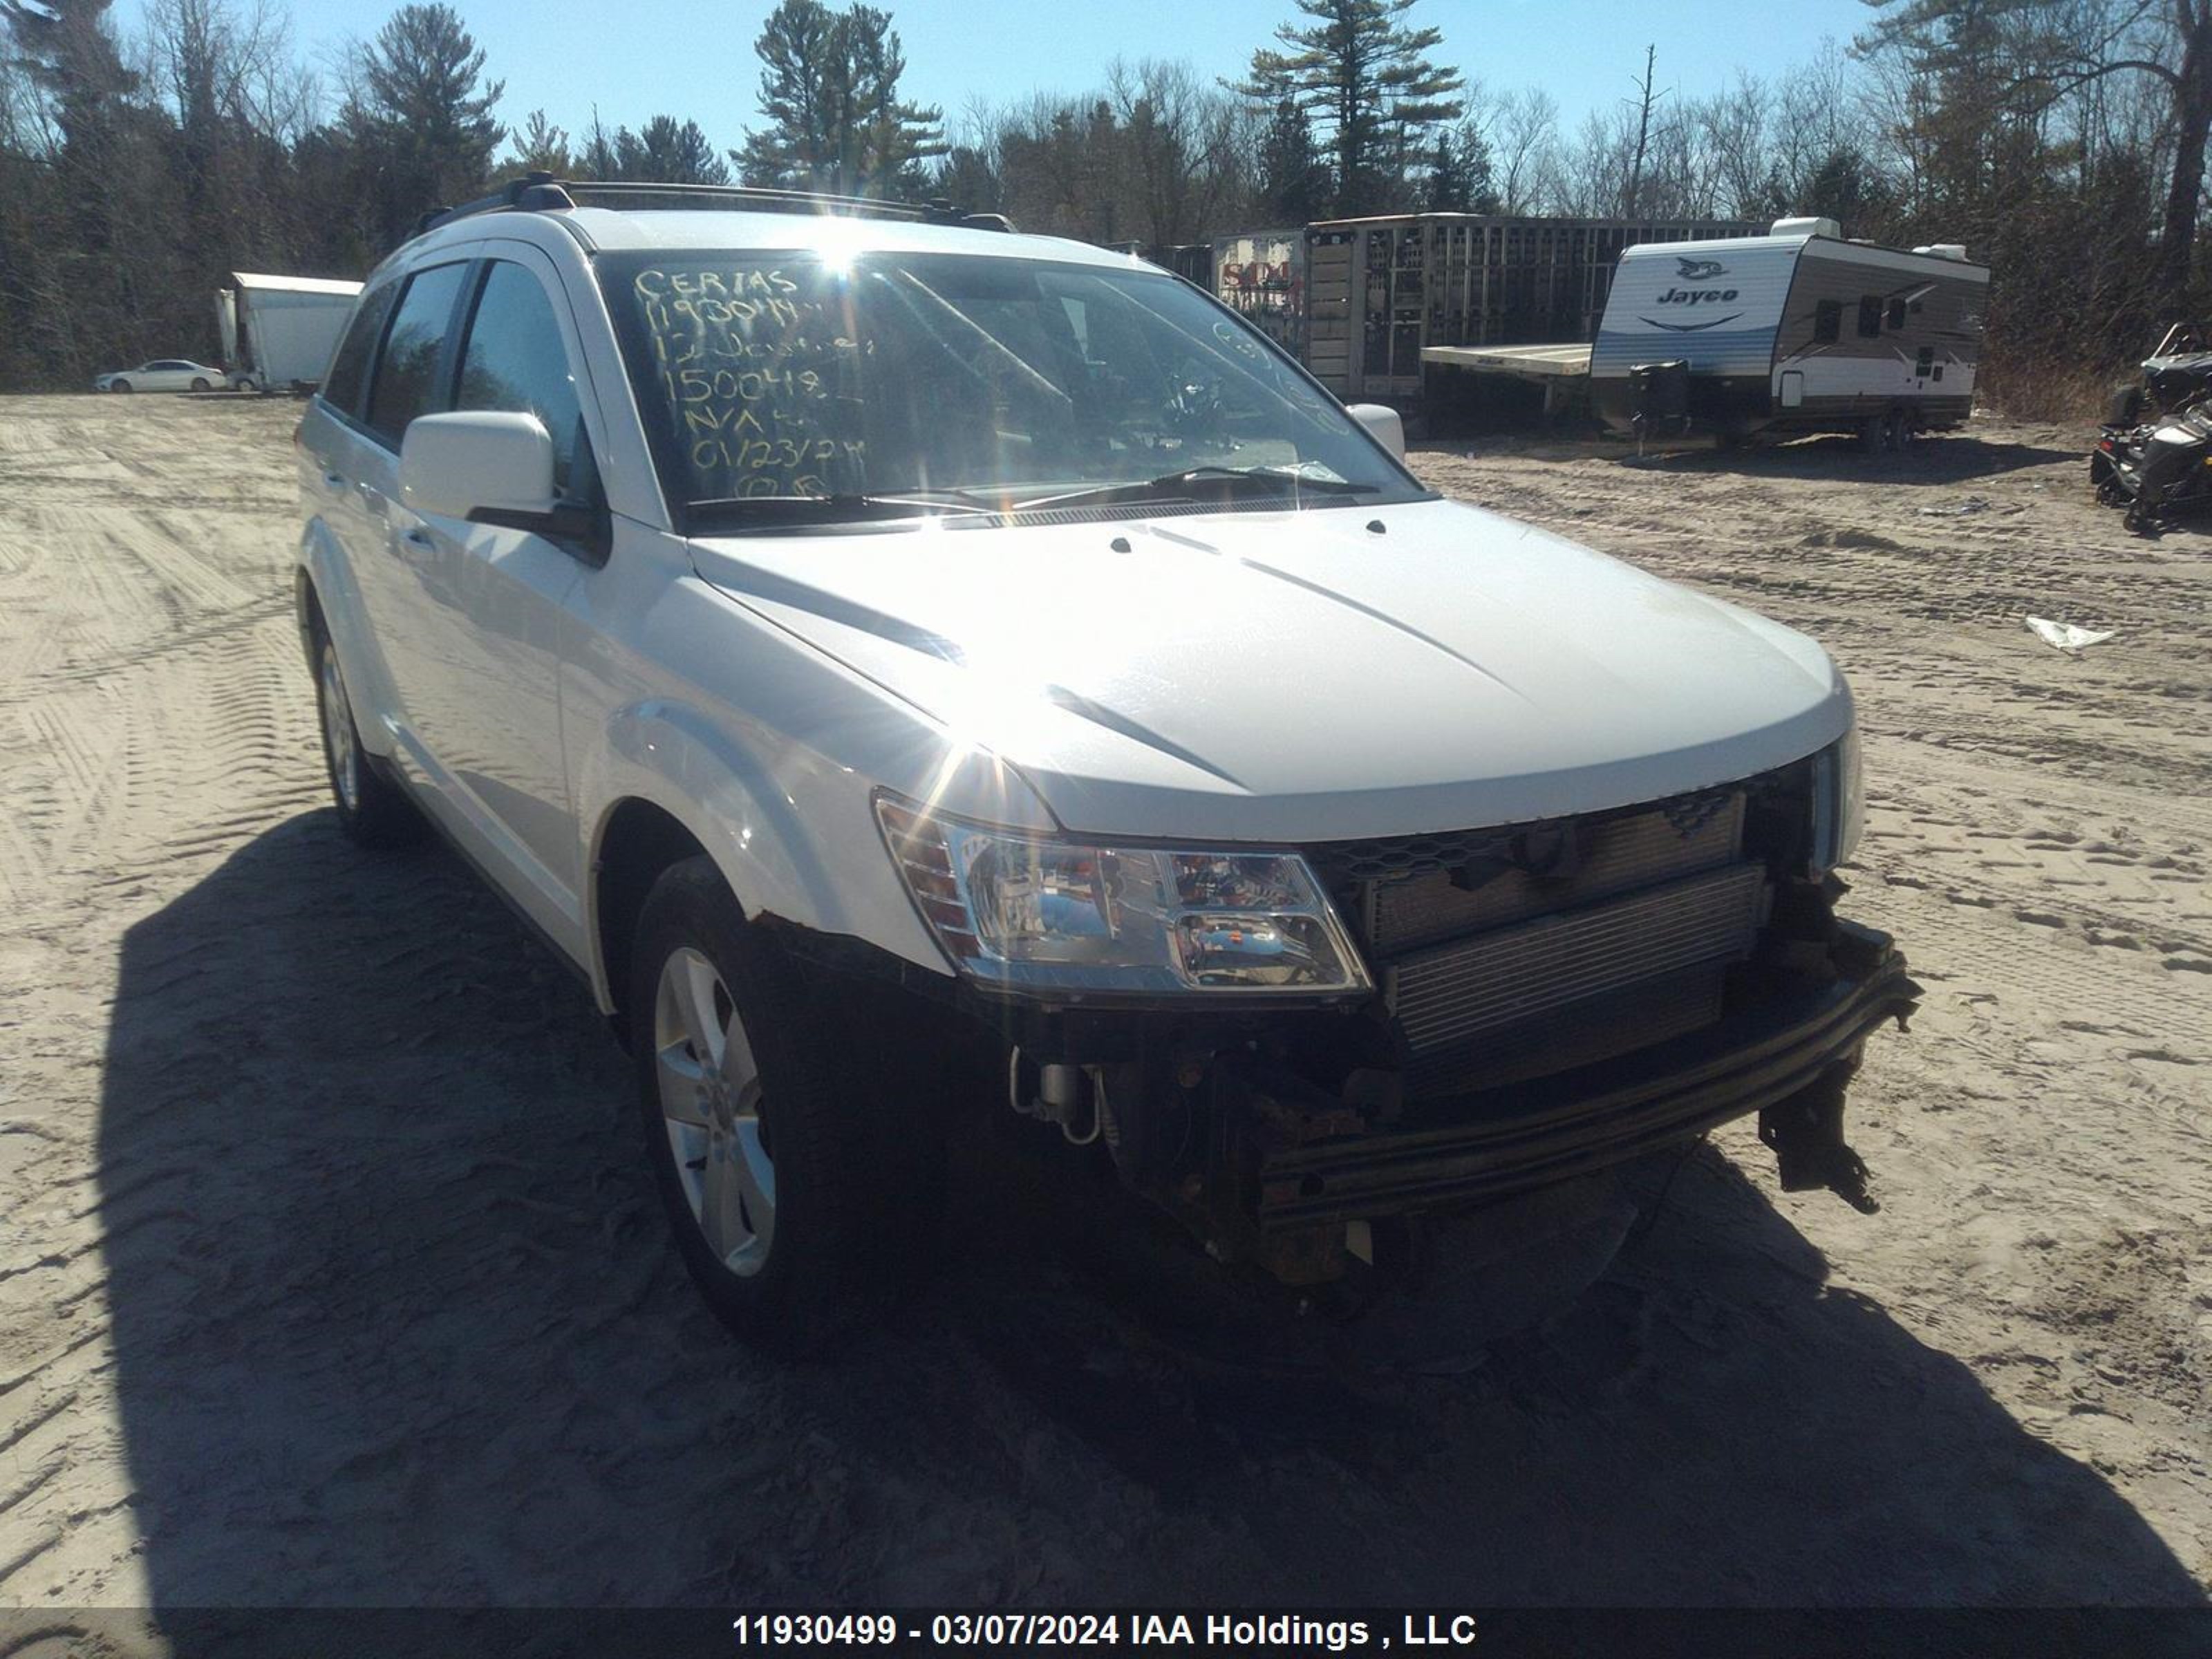 vin: 3C4PDCAB3CT150048 3C4PDCAB3CT150048 2012 dodge journey 2400 for Sale in l4a7x4, 16505 Hwy 48 , Stouffville, Ontario, Canada